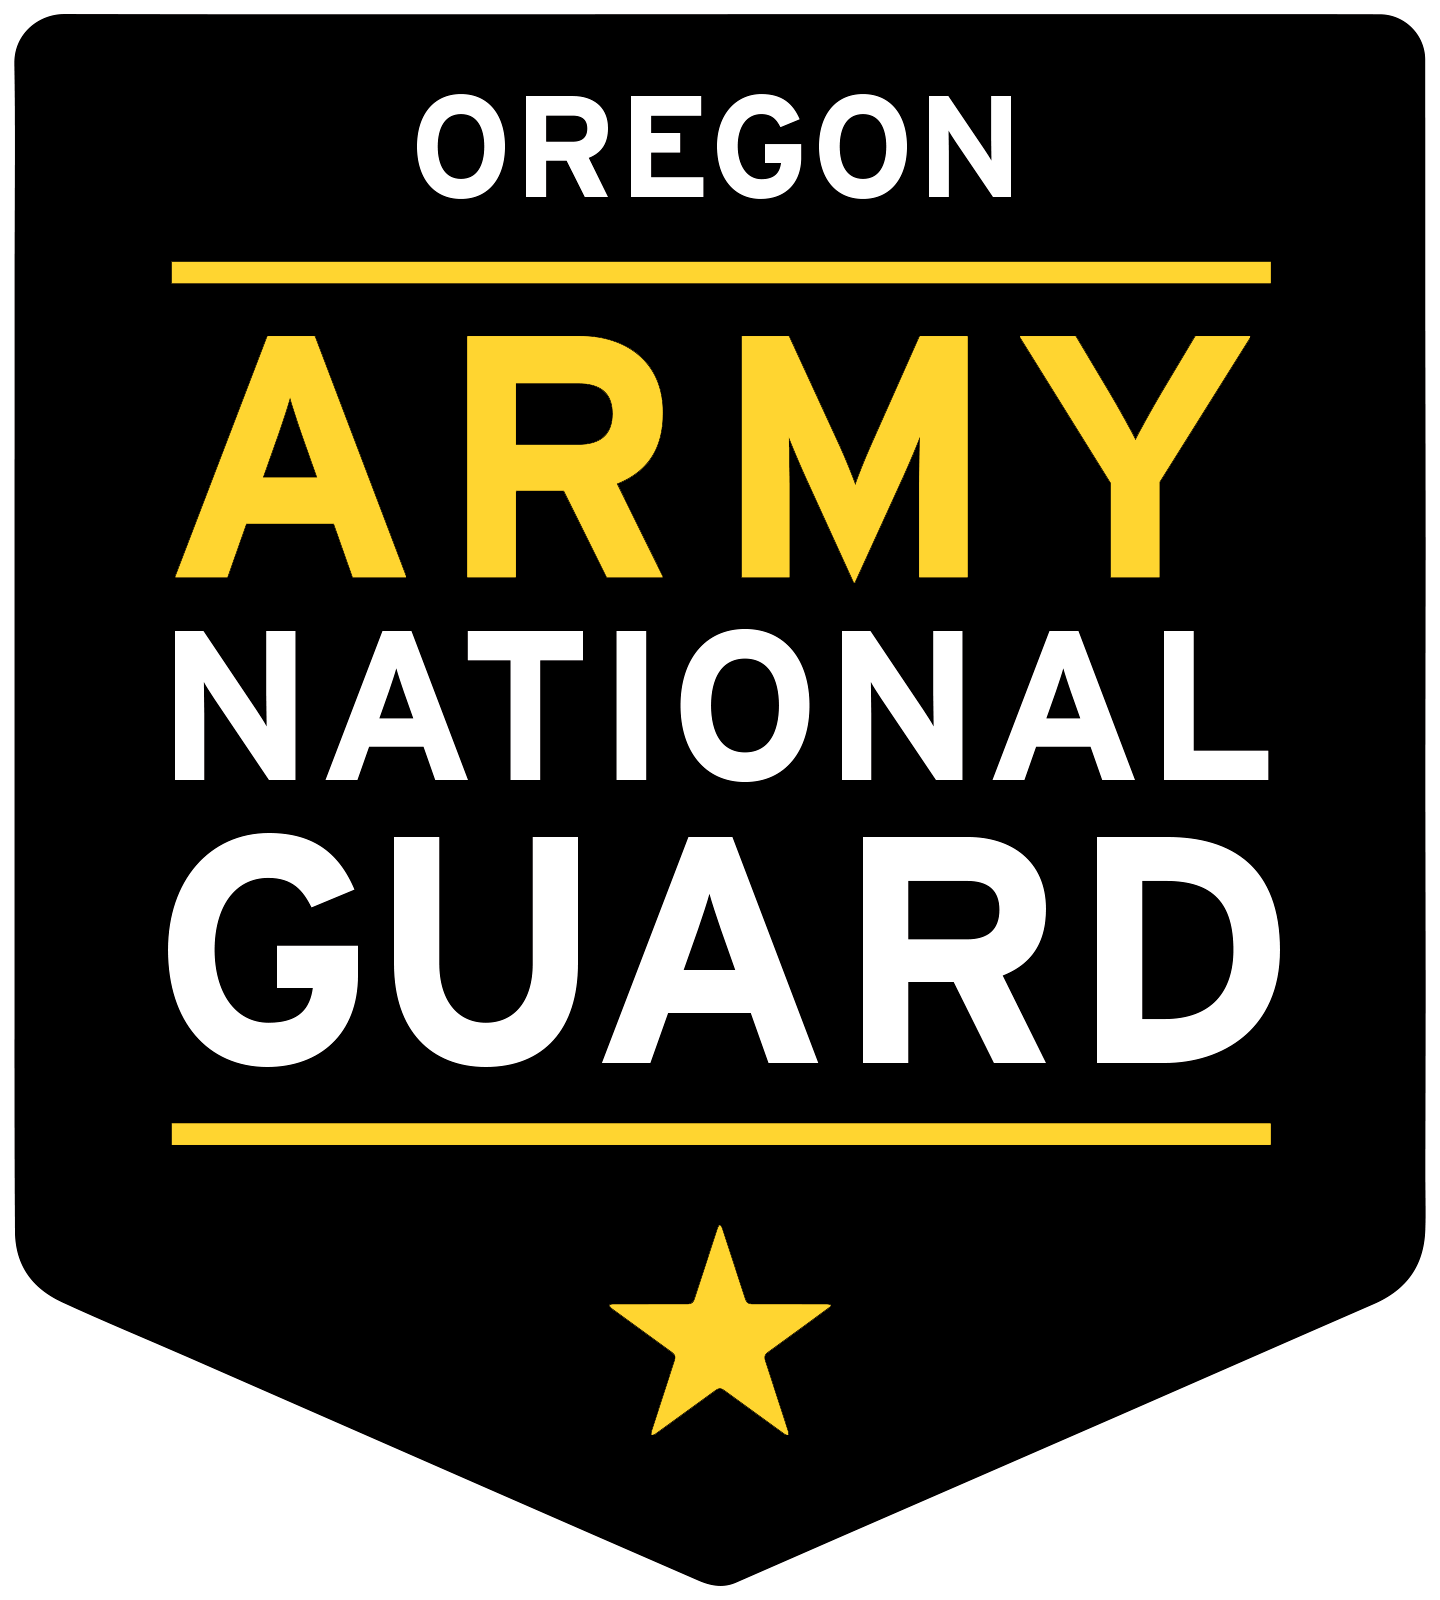 JOIN THE OREGON ARMY NATIONAL GUARD